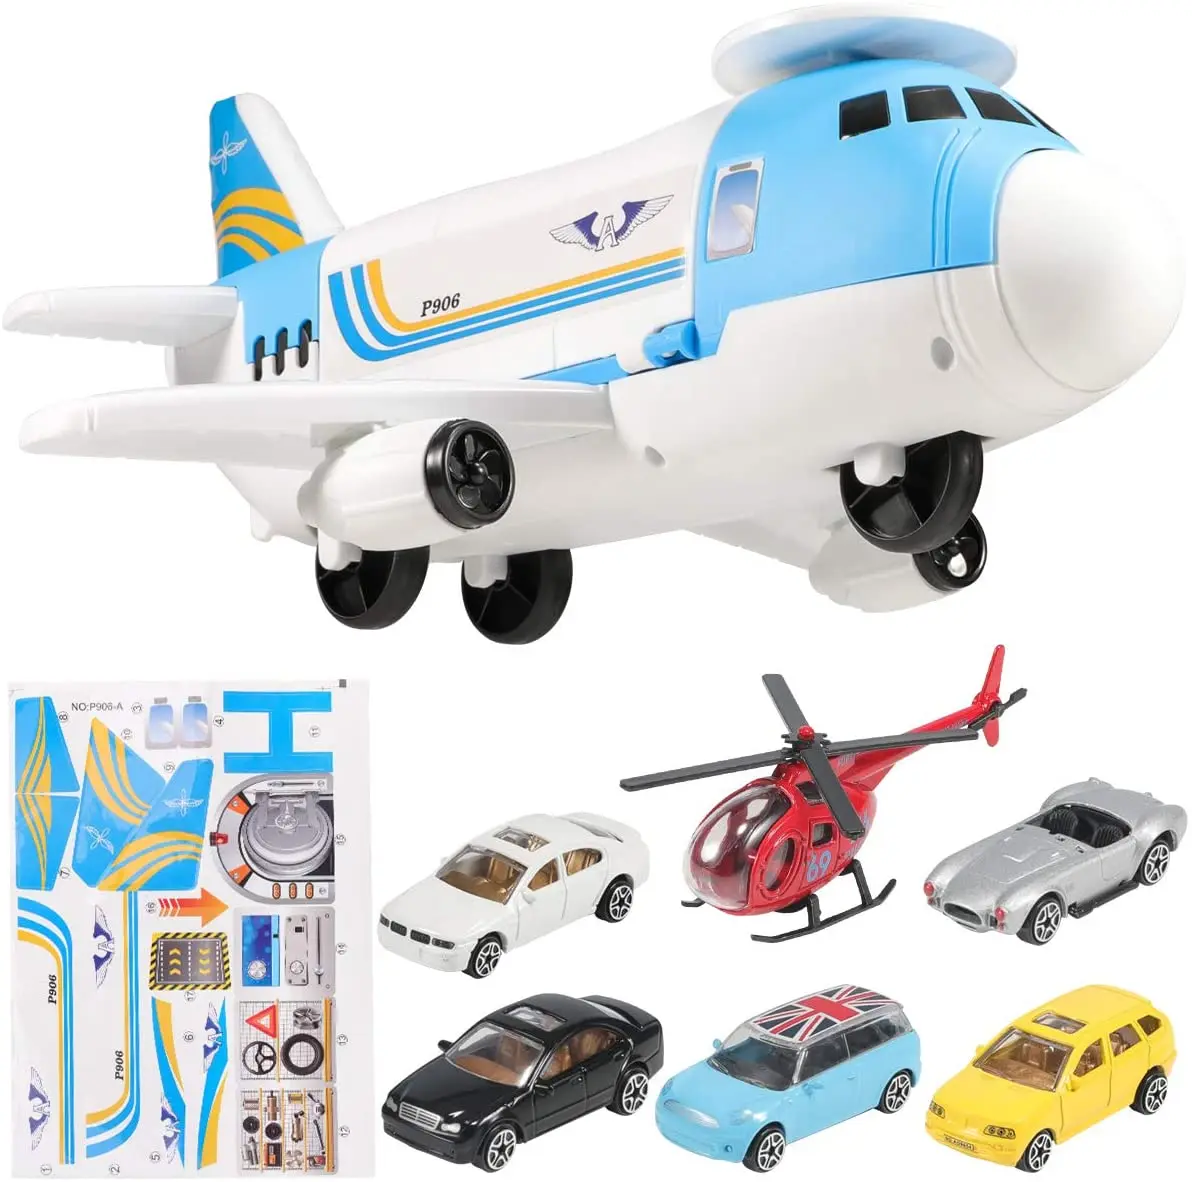 Educational Vehicle Airplane Car Set for 3 4 5 6 Years Old Boys and Girls Airplane Toys Set with Transport Cargo with 4pcs Engineering Theme Vehicles car Toy Plane Toys with Lights and Sounds 